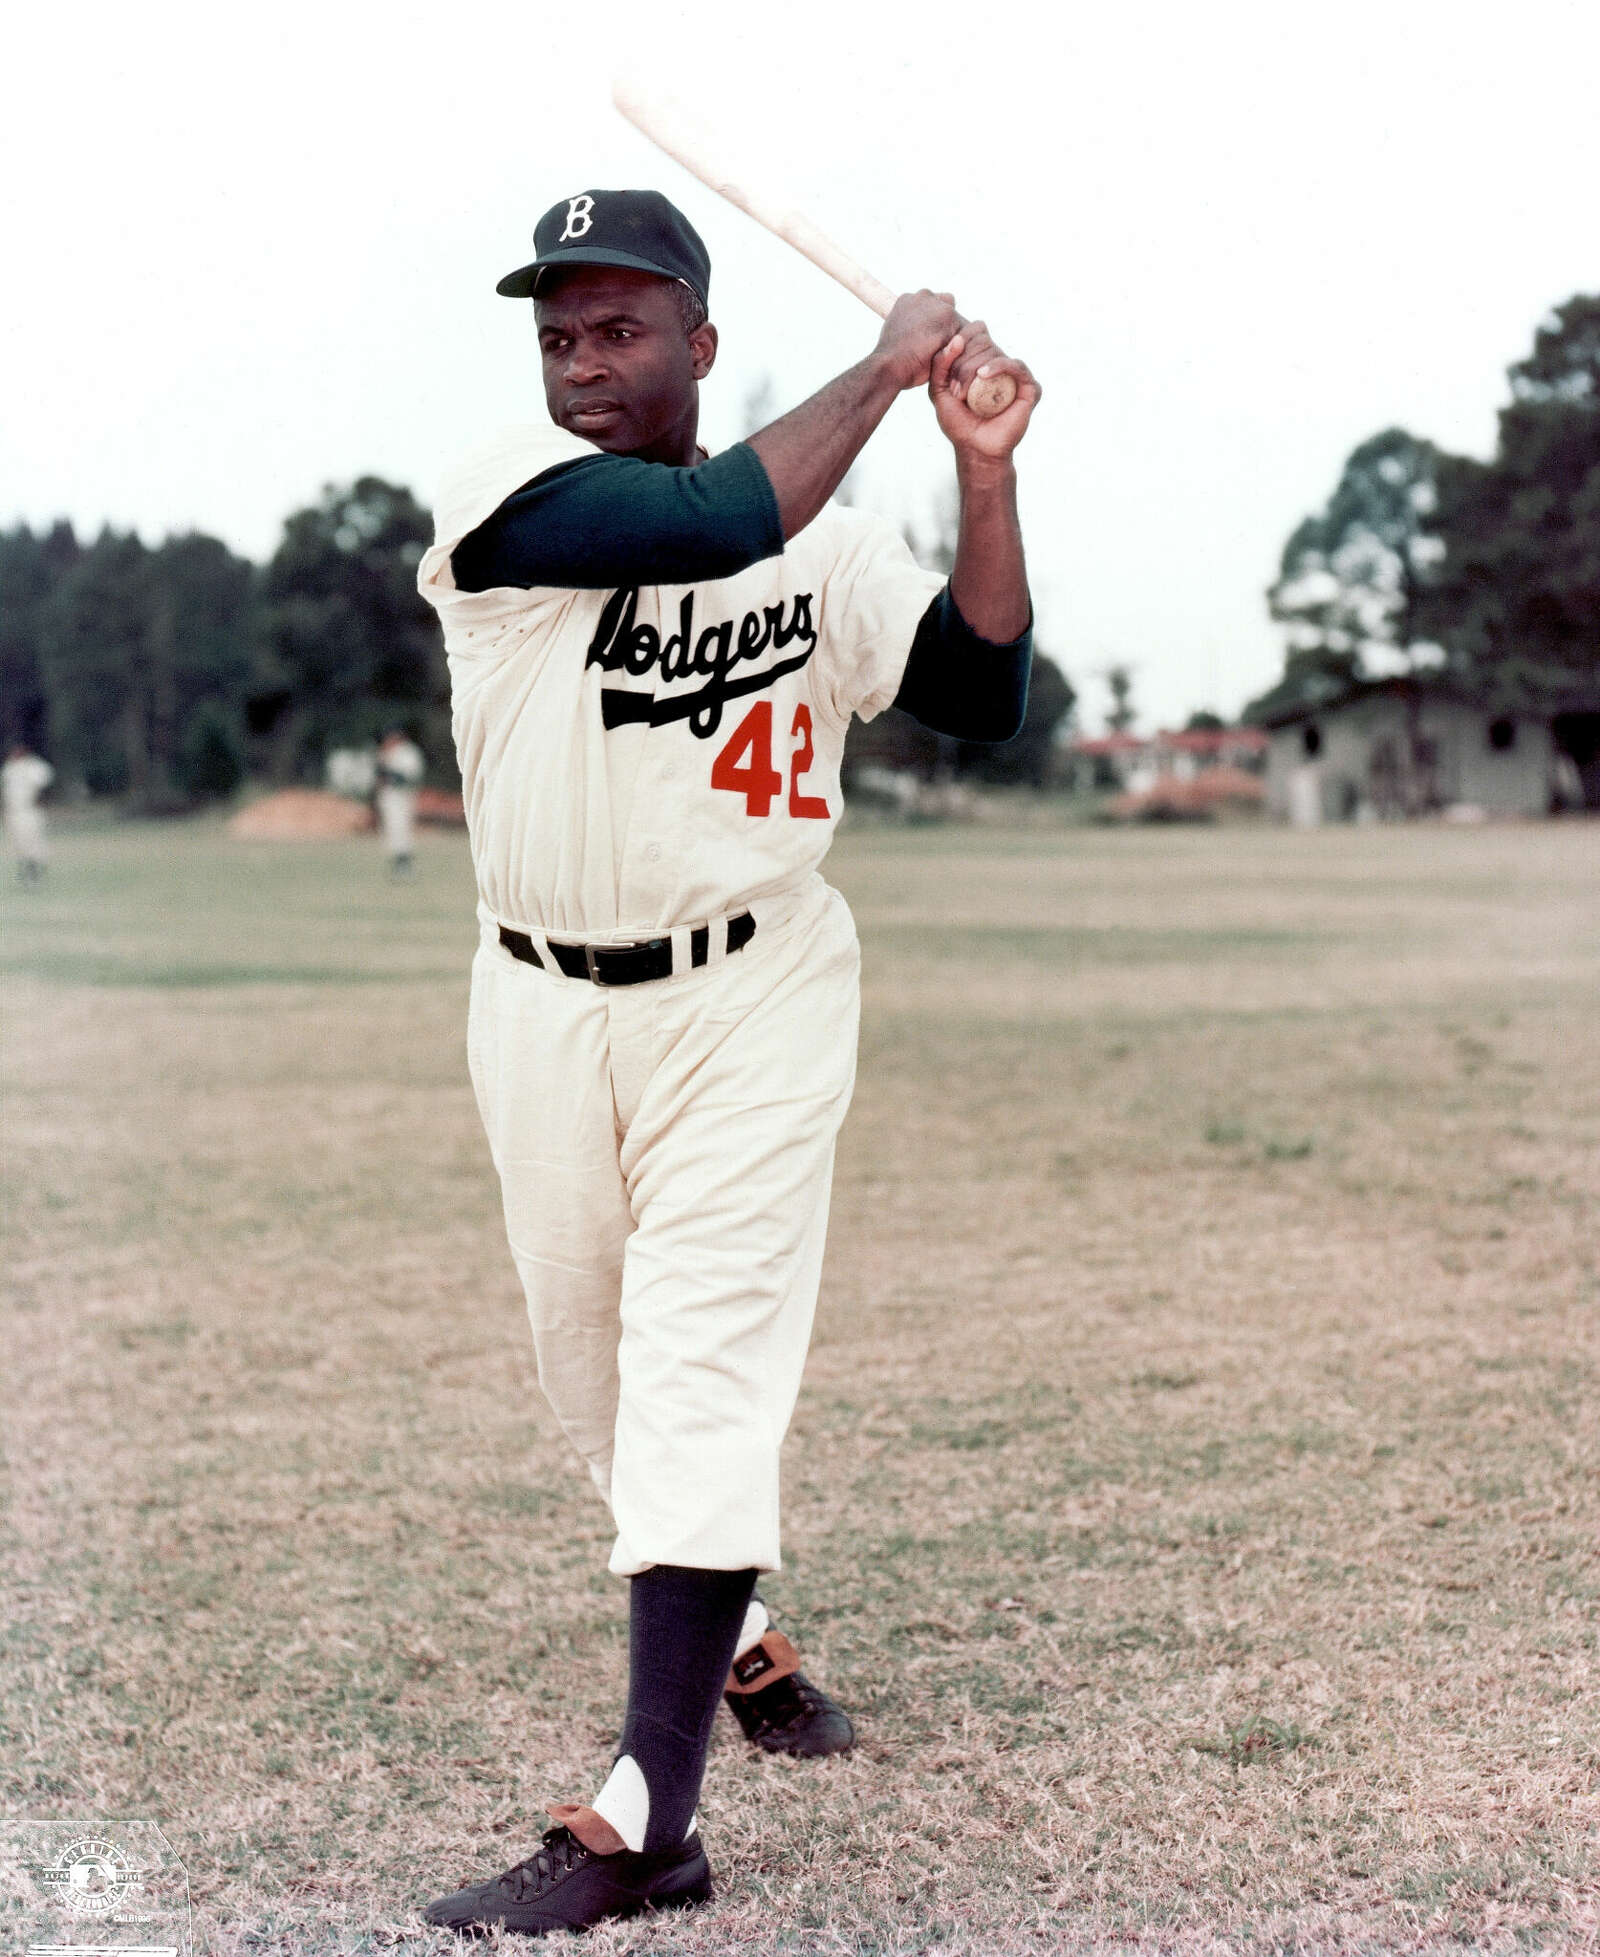 Burlington County Prosecutor's Office - A nice diversion with a milestone  worth noting. Today is the 73rd anniversary of Jackie Robinson breaking  baseball's color barrier. Lucky number of the day is 42.